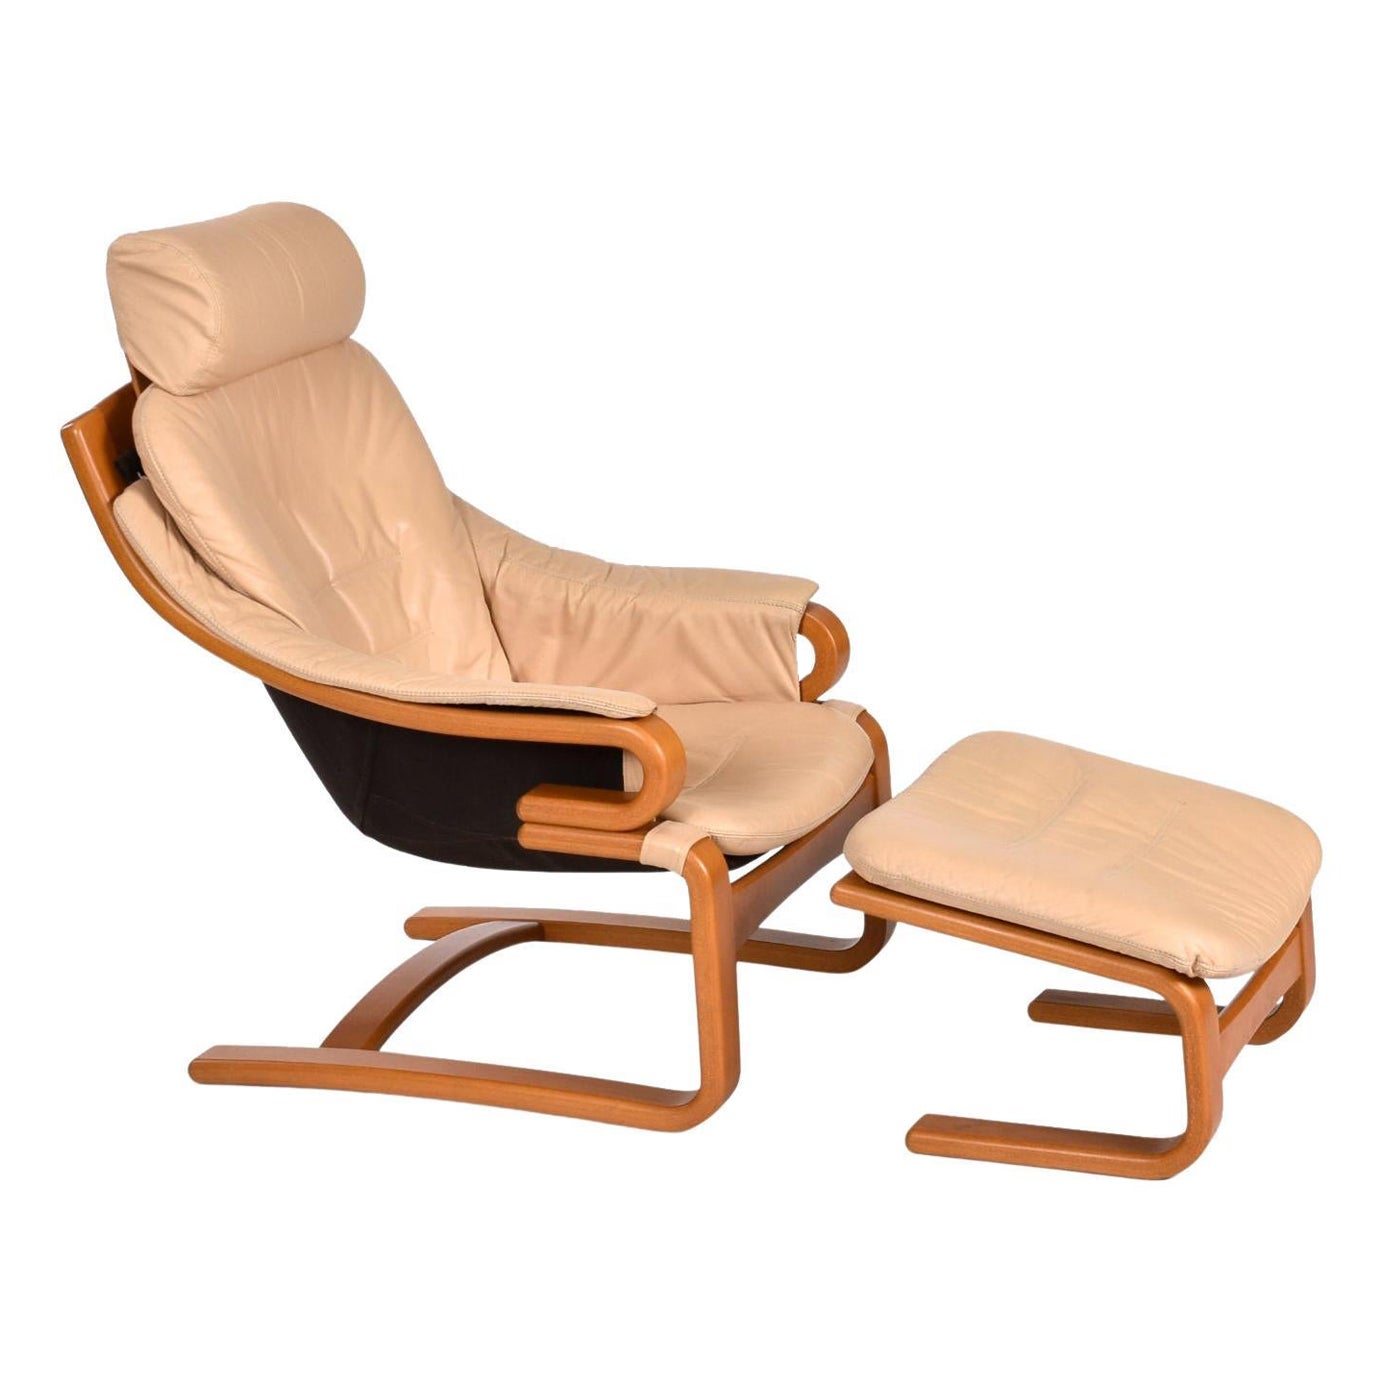 Vintage 1970s Danish teak Apollo chair with matching ottoman by Skipper Mobler. The armchair achieves a serious amount of comfort with it’s hammock-like canvas sling design. The headrest is both removable and height adjustable, so you can dial in